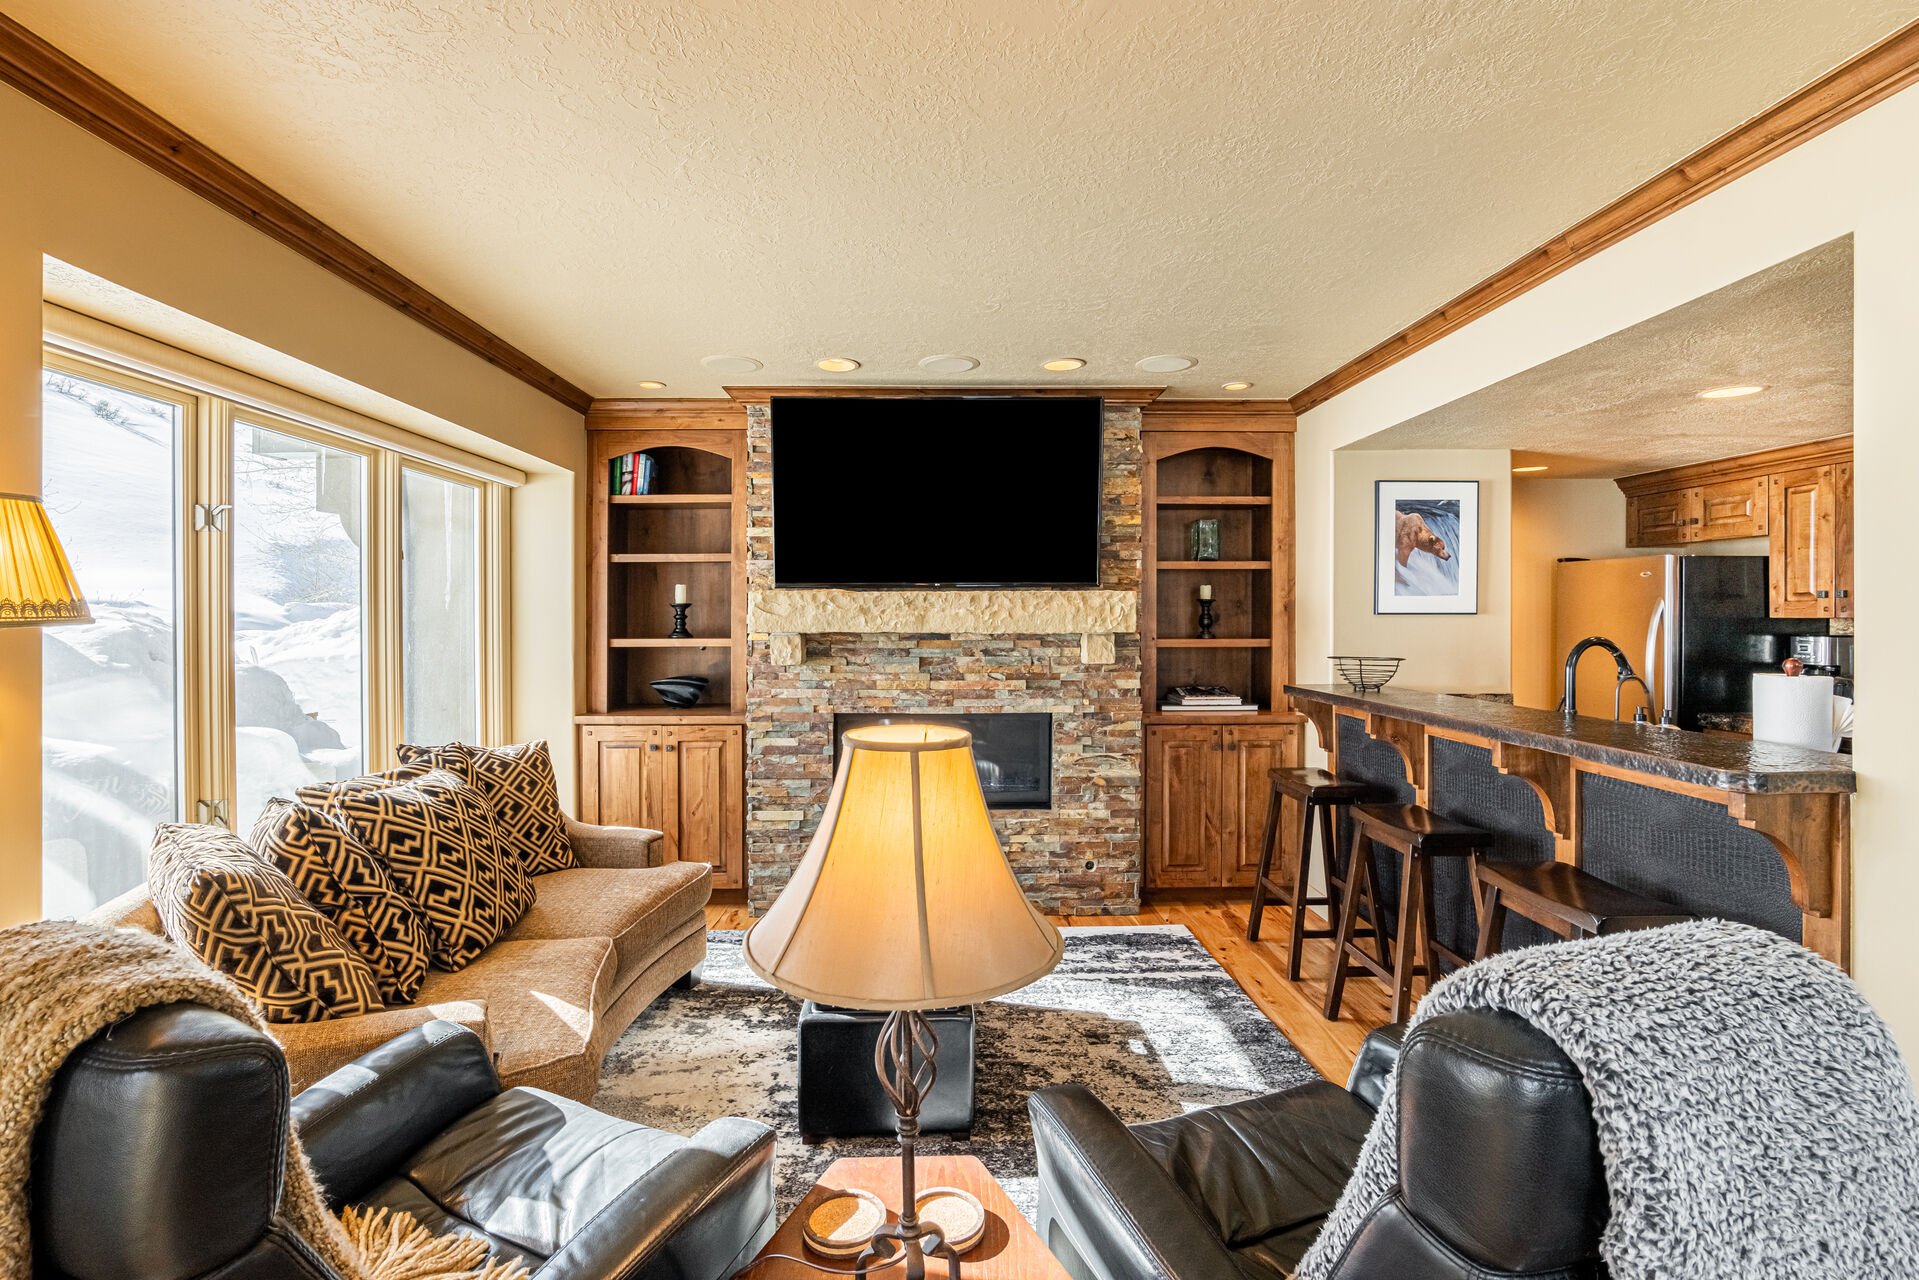 Living Room with plush couch, 2 electric, leather recliners, gas fireplace, and smart TV